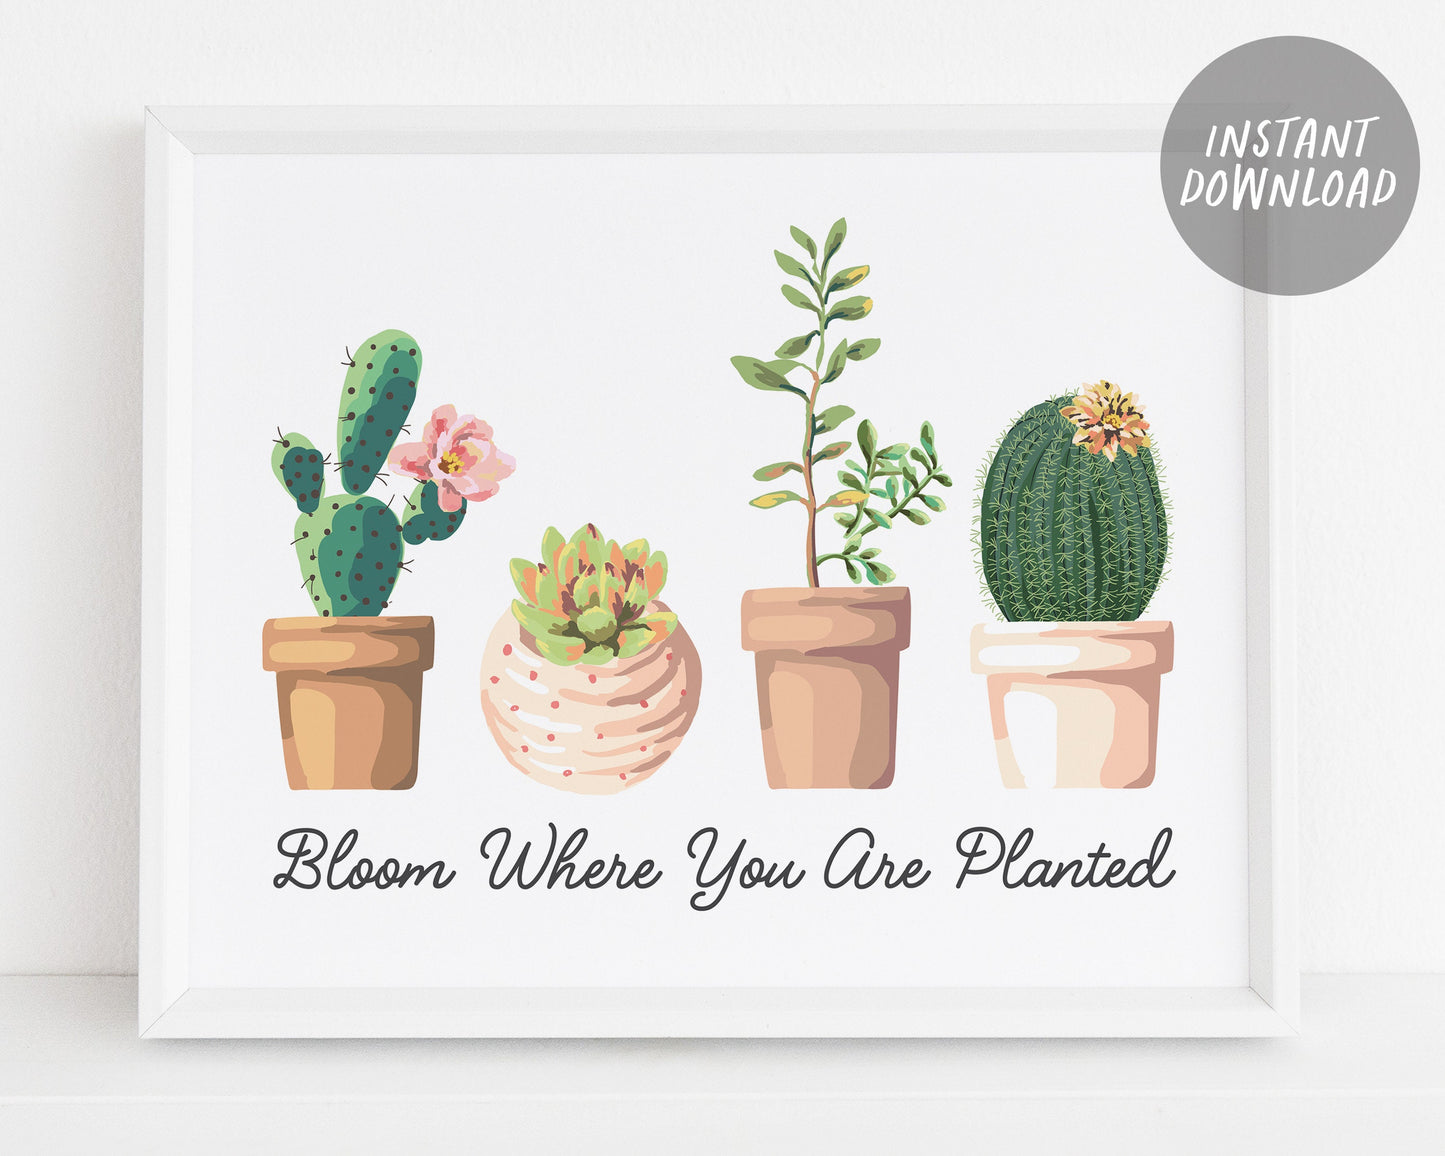 Bloom Where You Are Planted Quote, Inspirational Succulent Wreath Print, Botanical Cactus Mexico Boho Plant Wall Art Decor, Instant Download